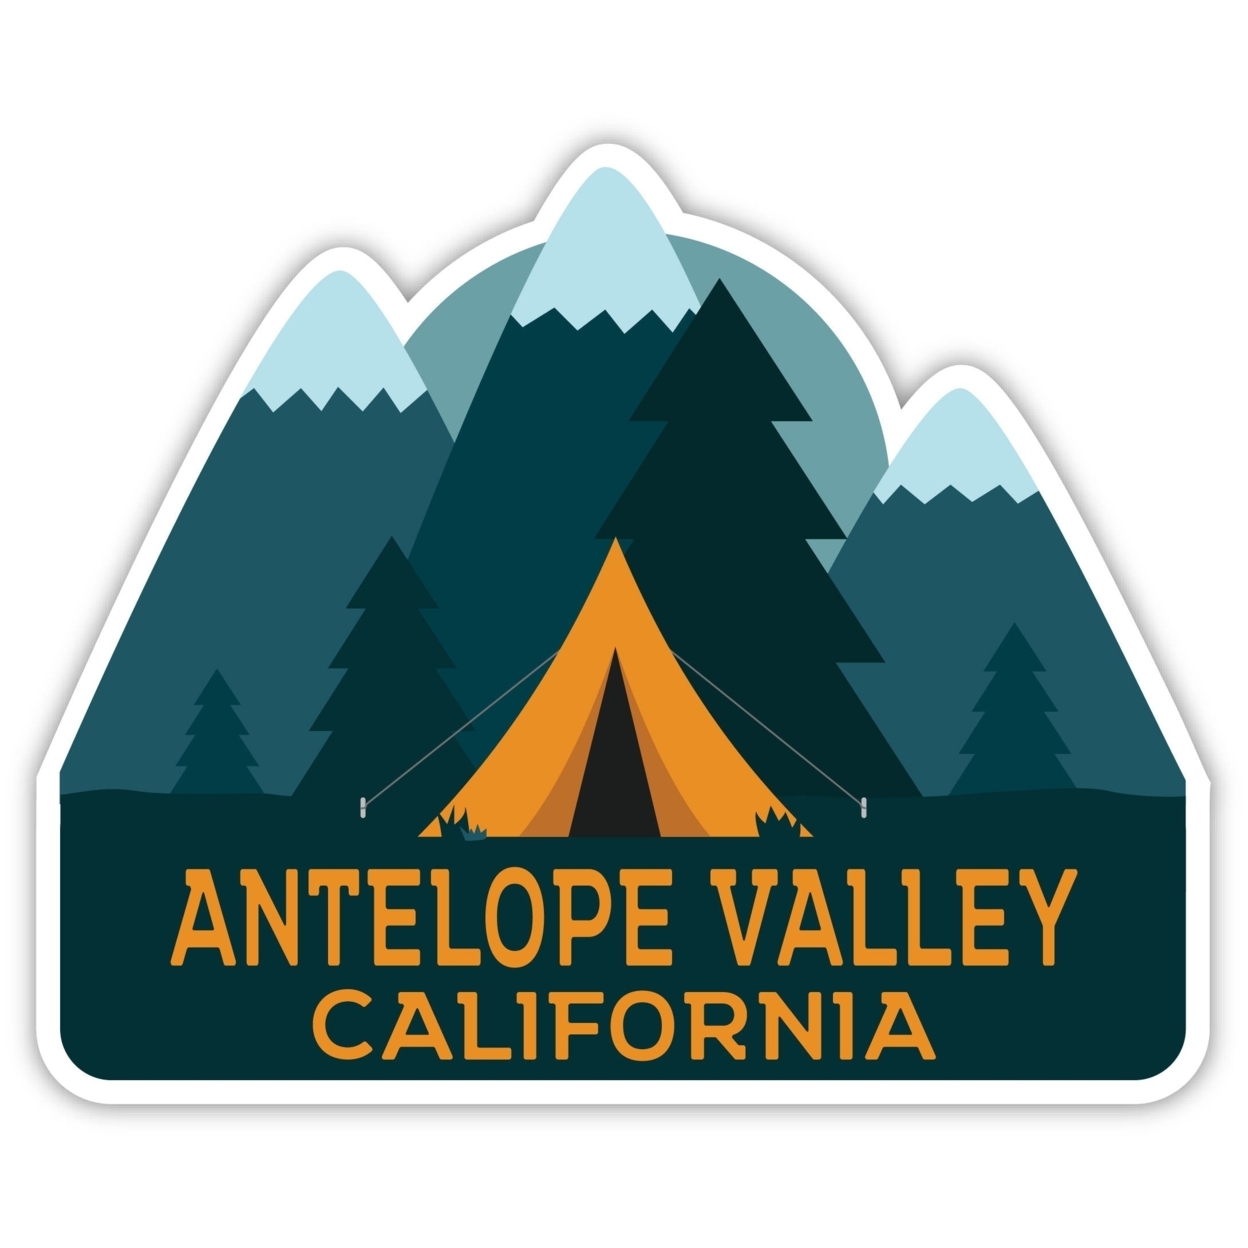 Antelope Valley California Souvenir Decorative Stickers (Choose Theme And Size) - Single Unit, 12-Inch, Tent